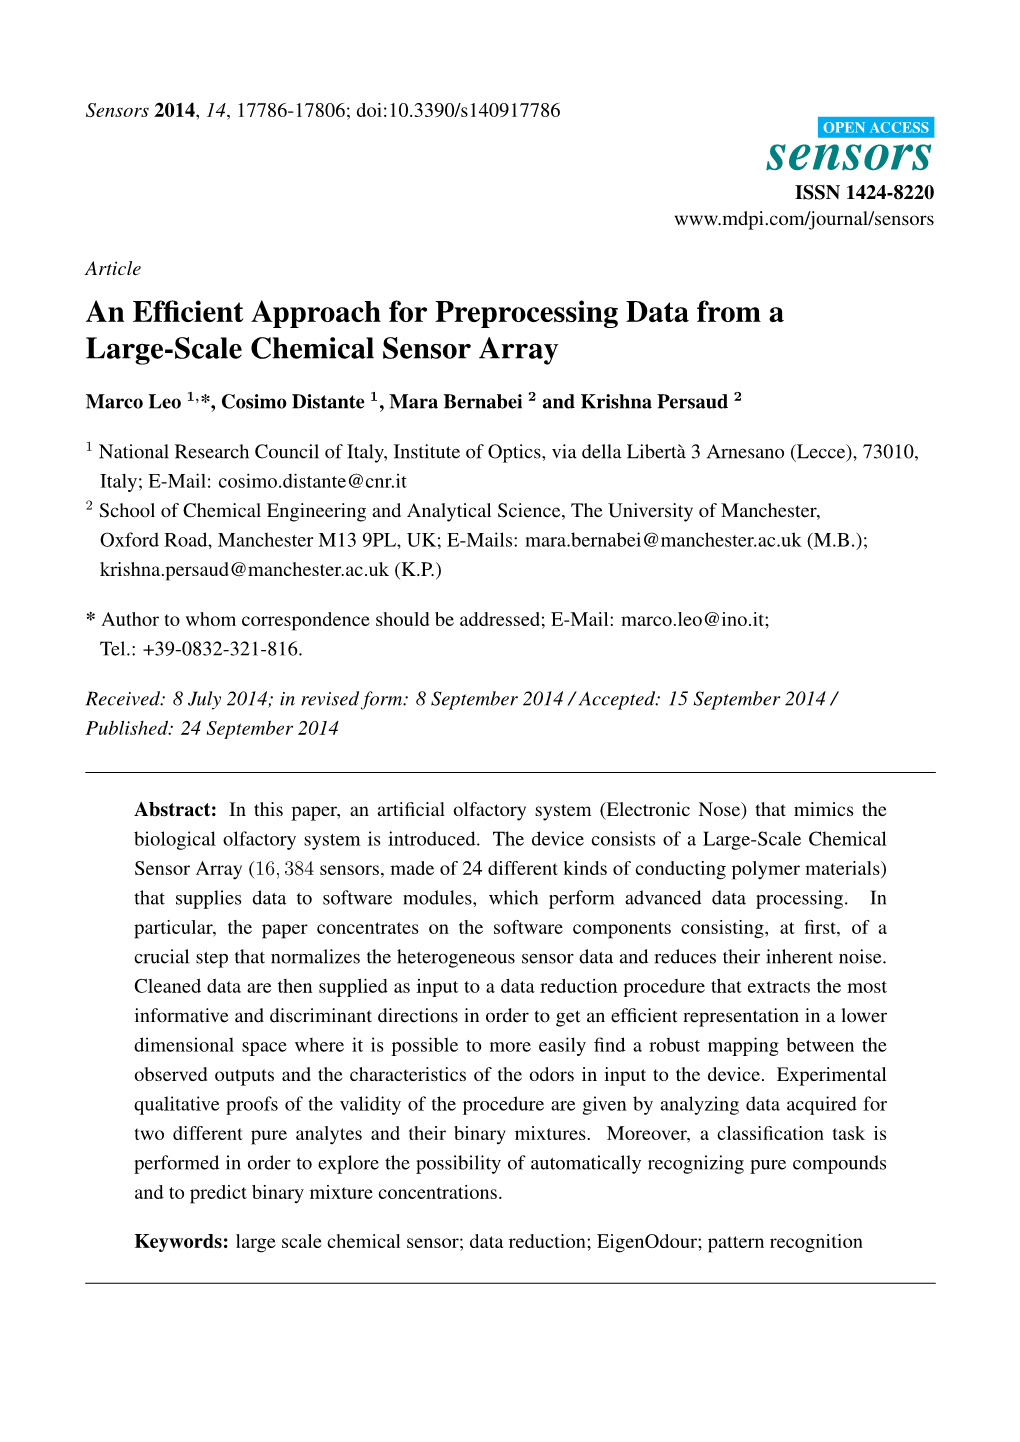 An Efficient Approach for Preprocessing Data from a Large-Scale Chemical Sensor Array